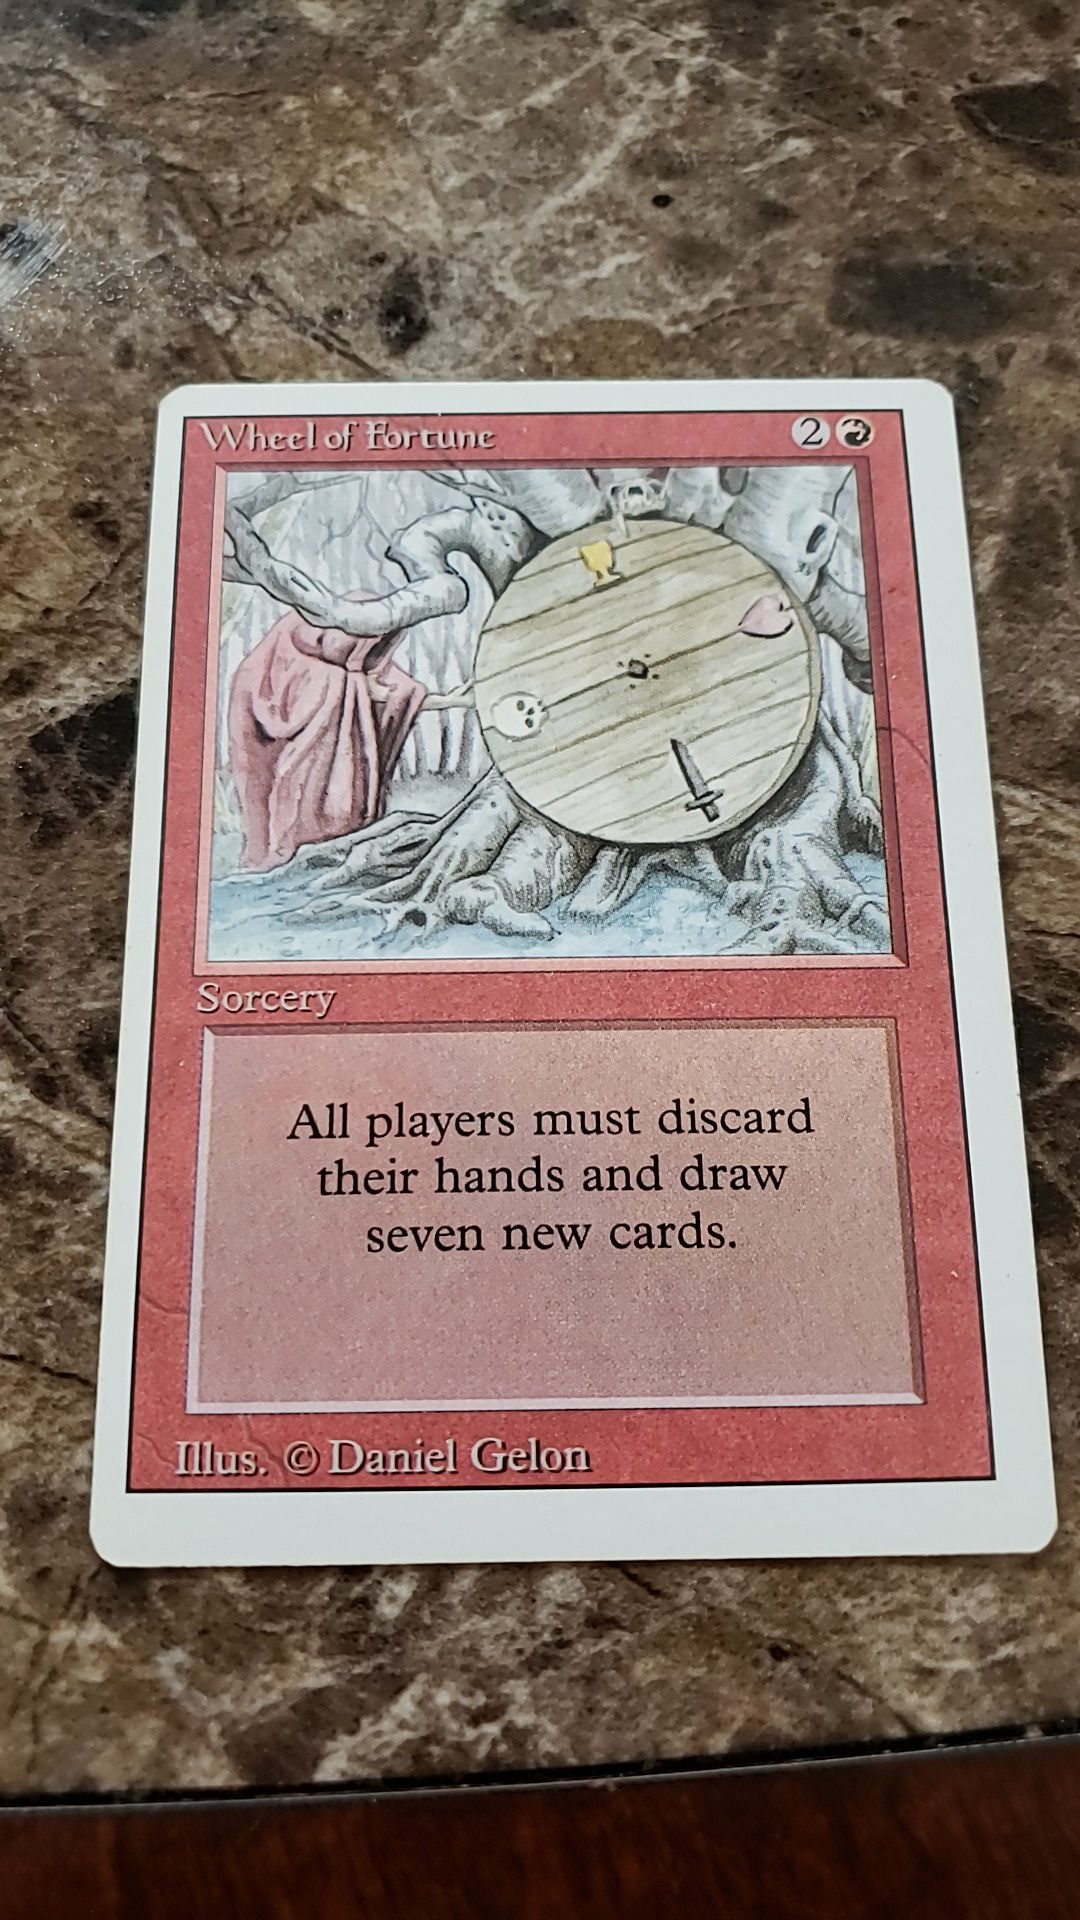 Magic the gathering card, wheel of fortune